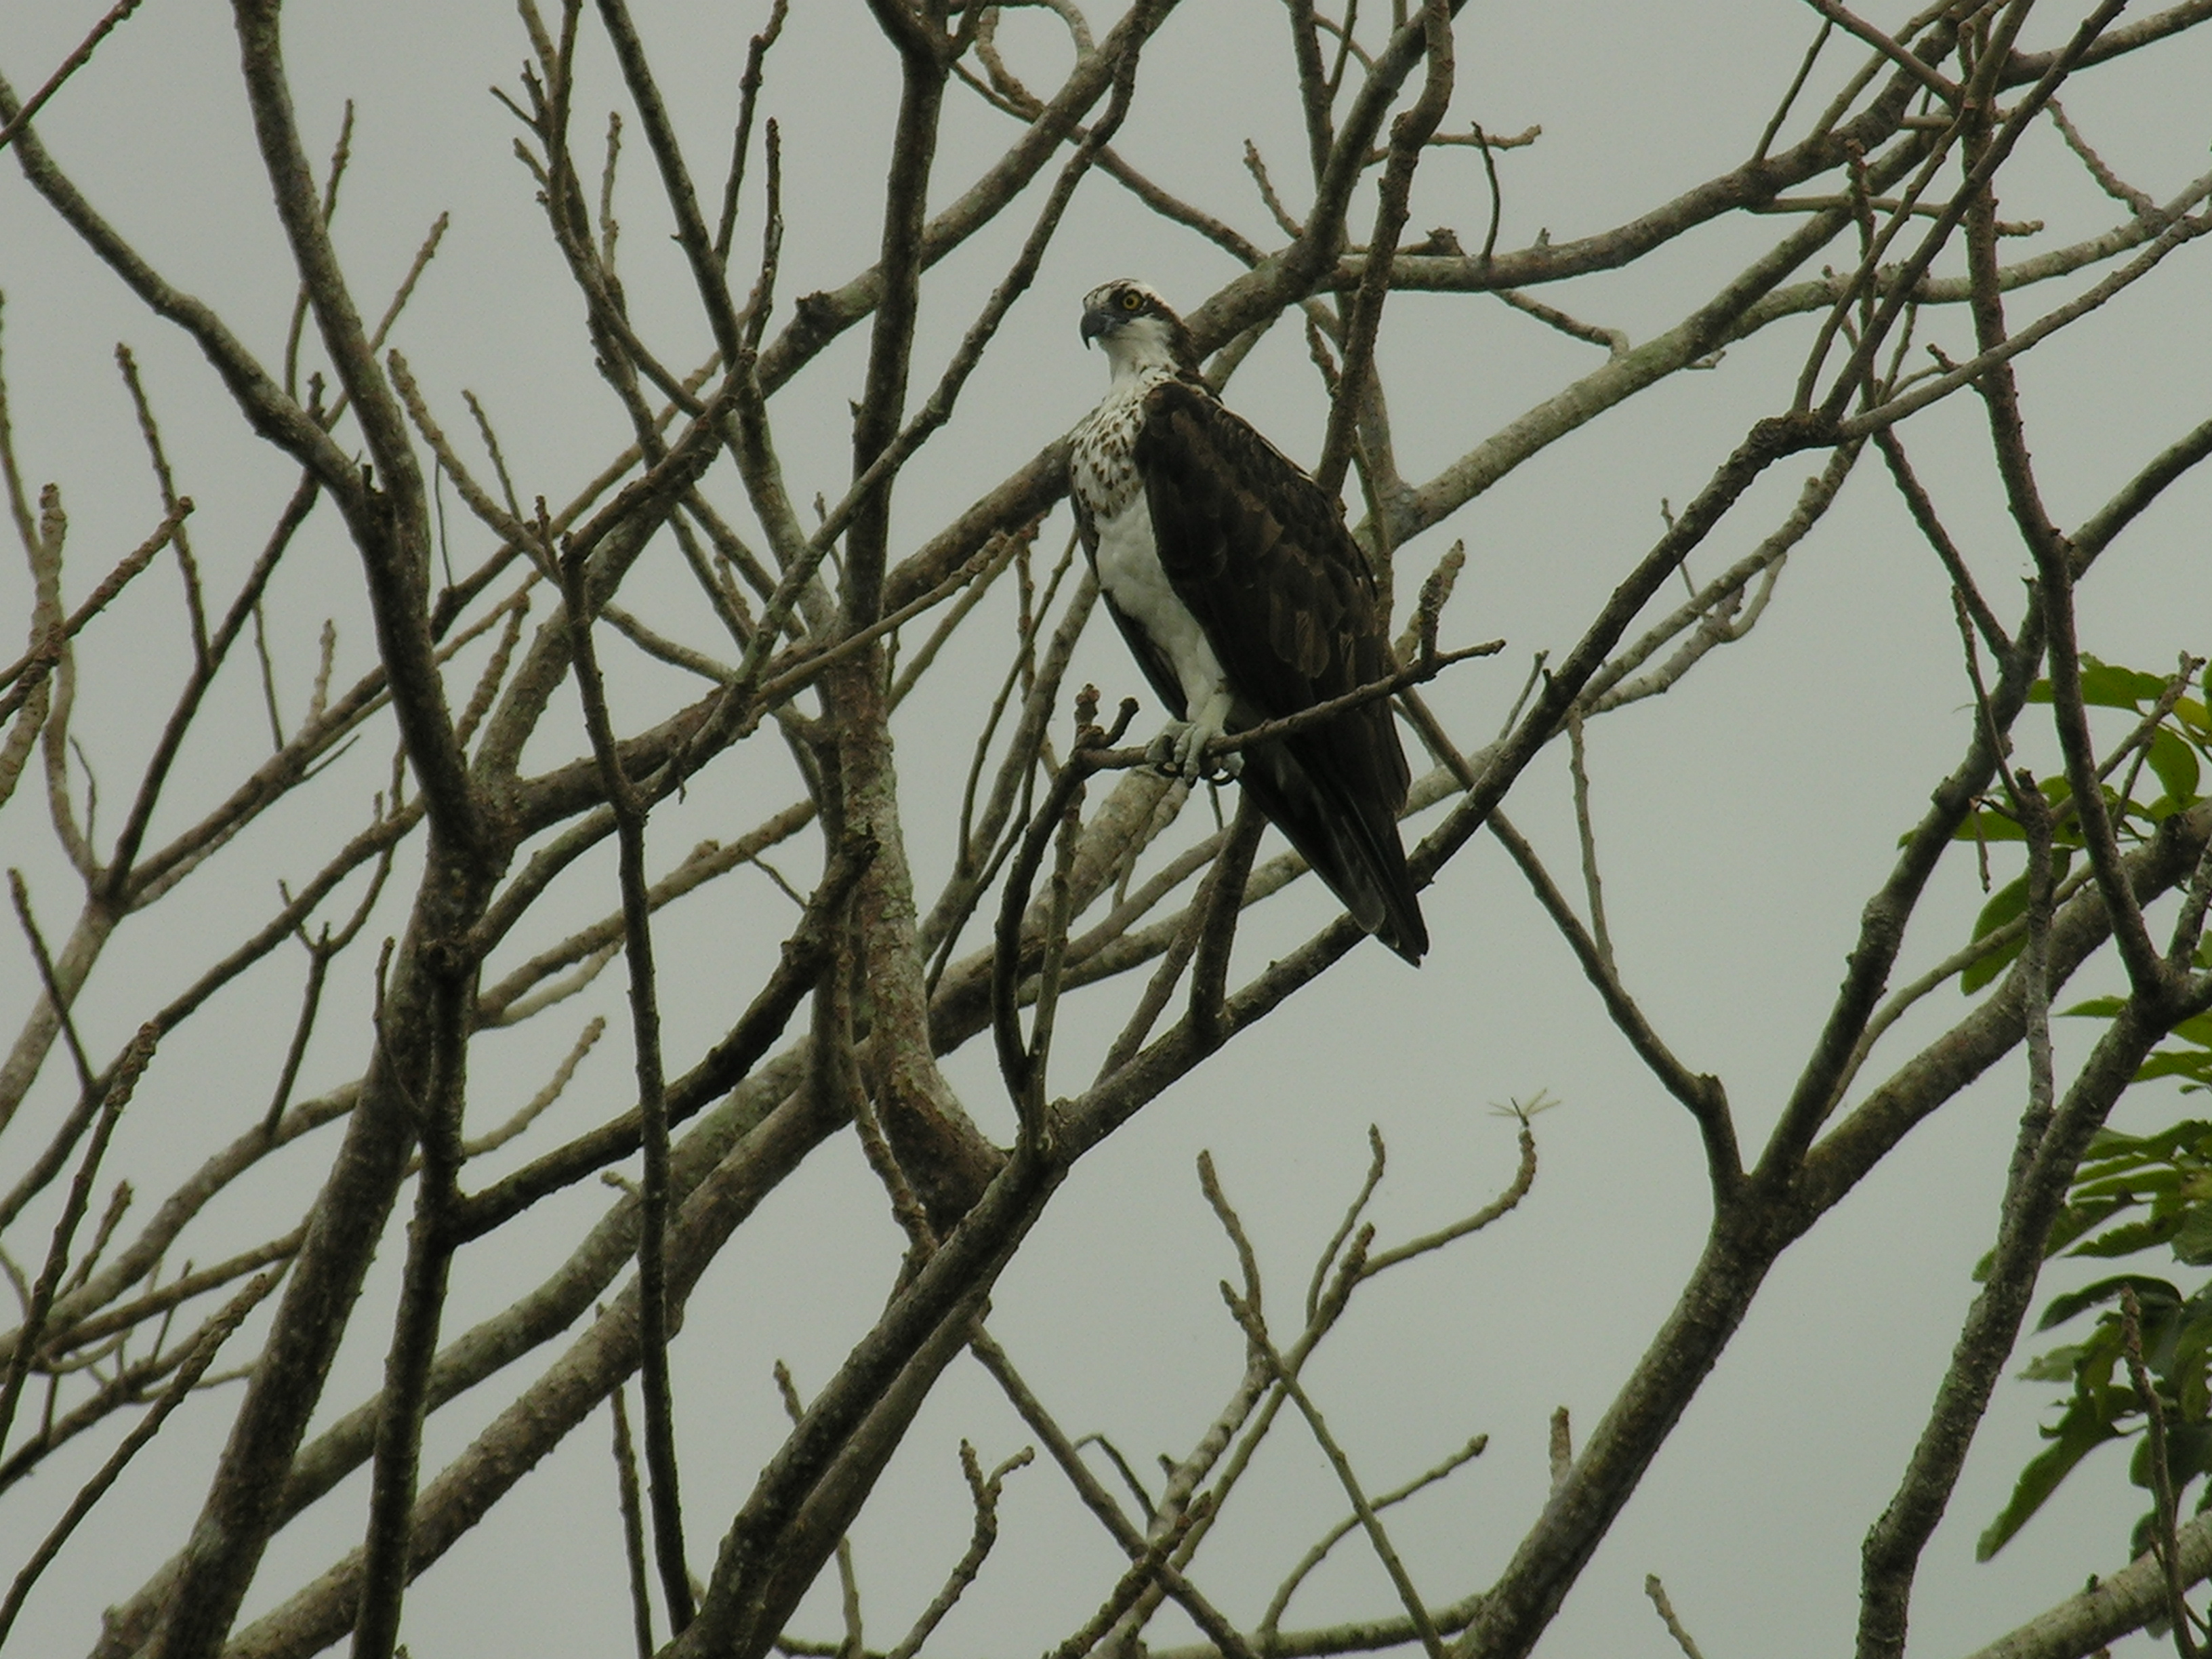 Osprey met while on Birdwatching in Nicaragua